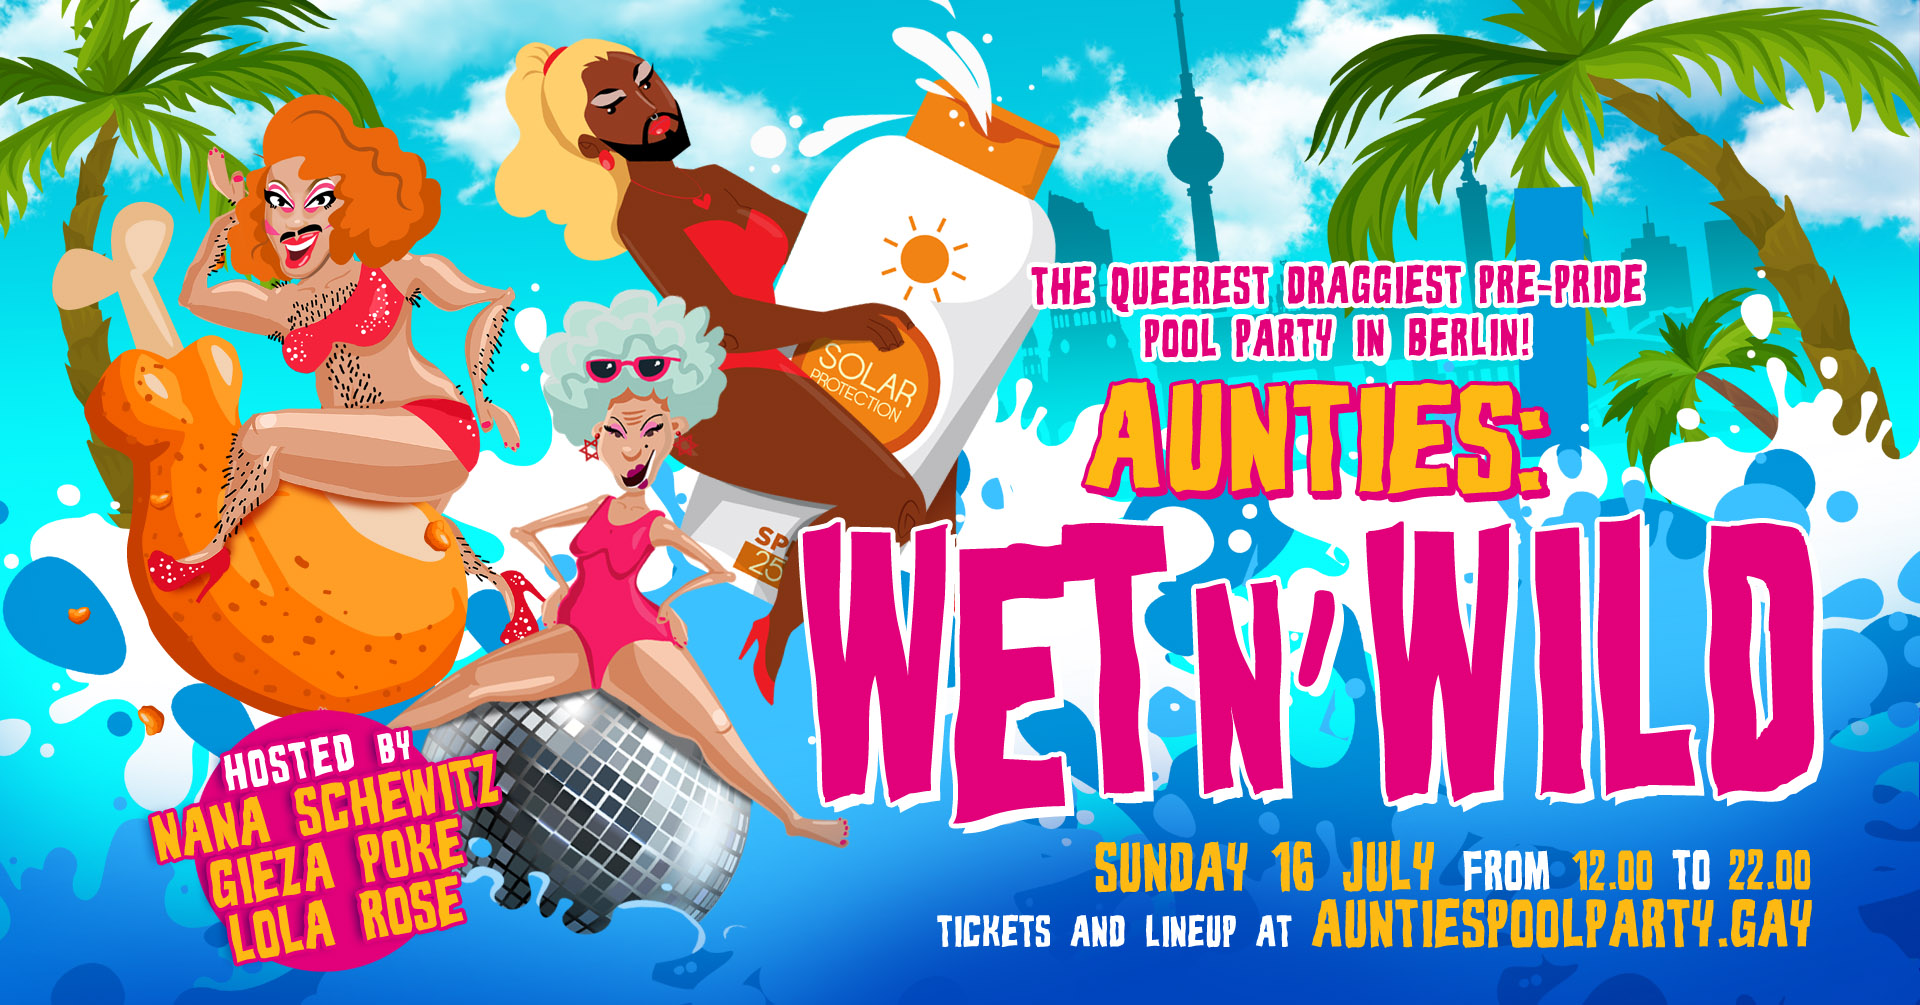 Pool Party by Aunties: Wet n Wild!